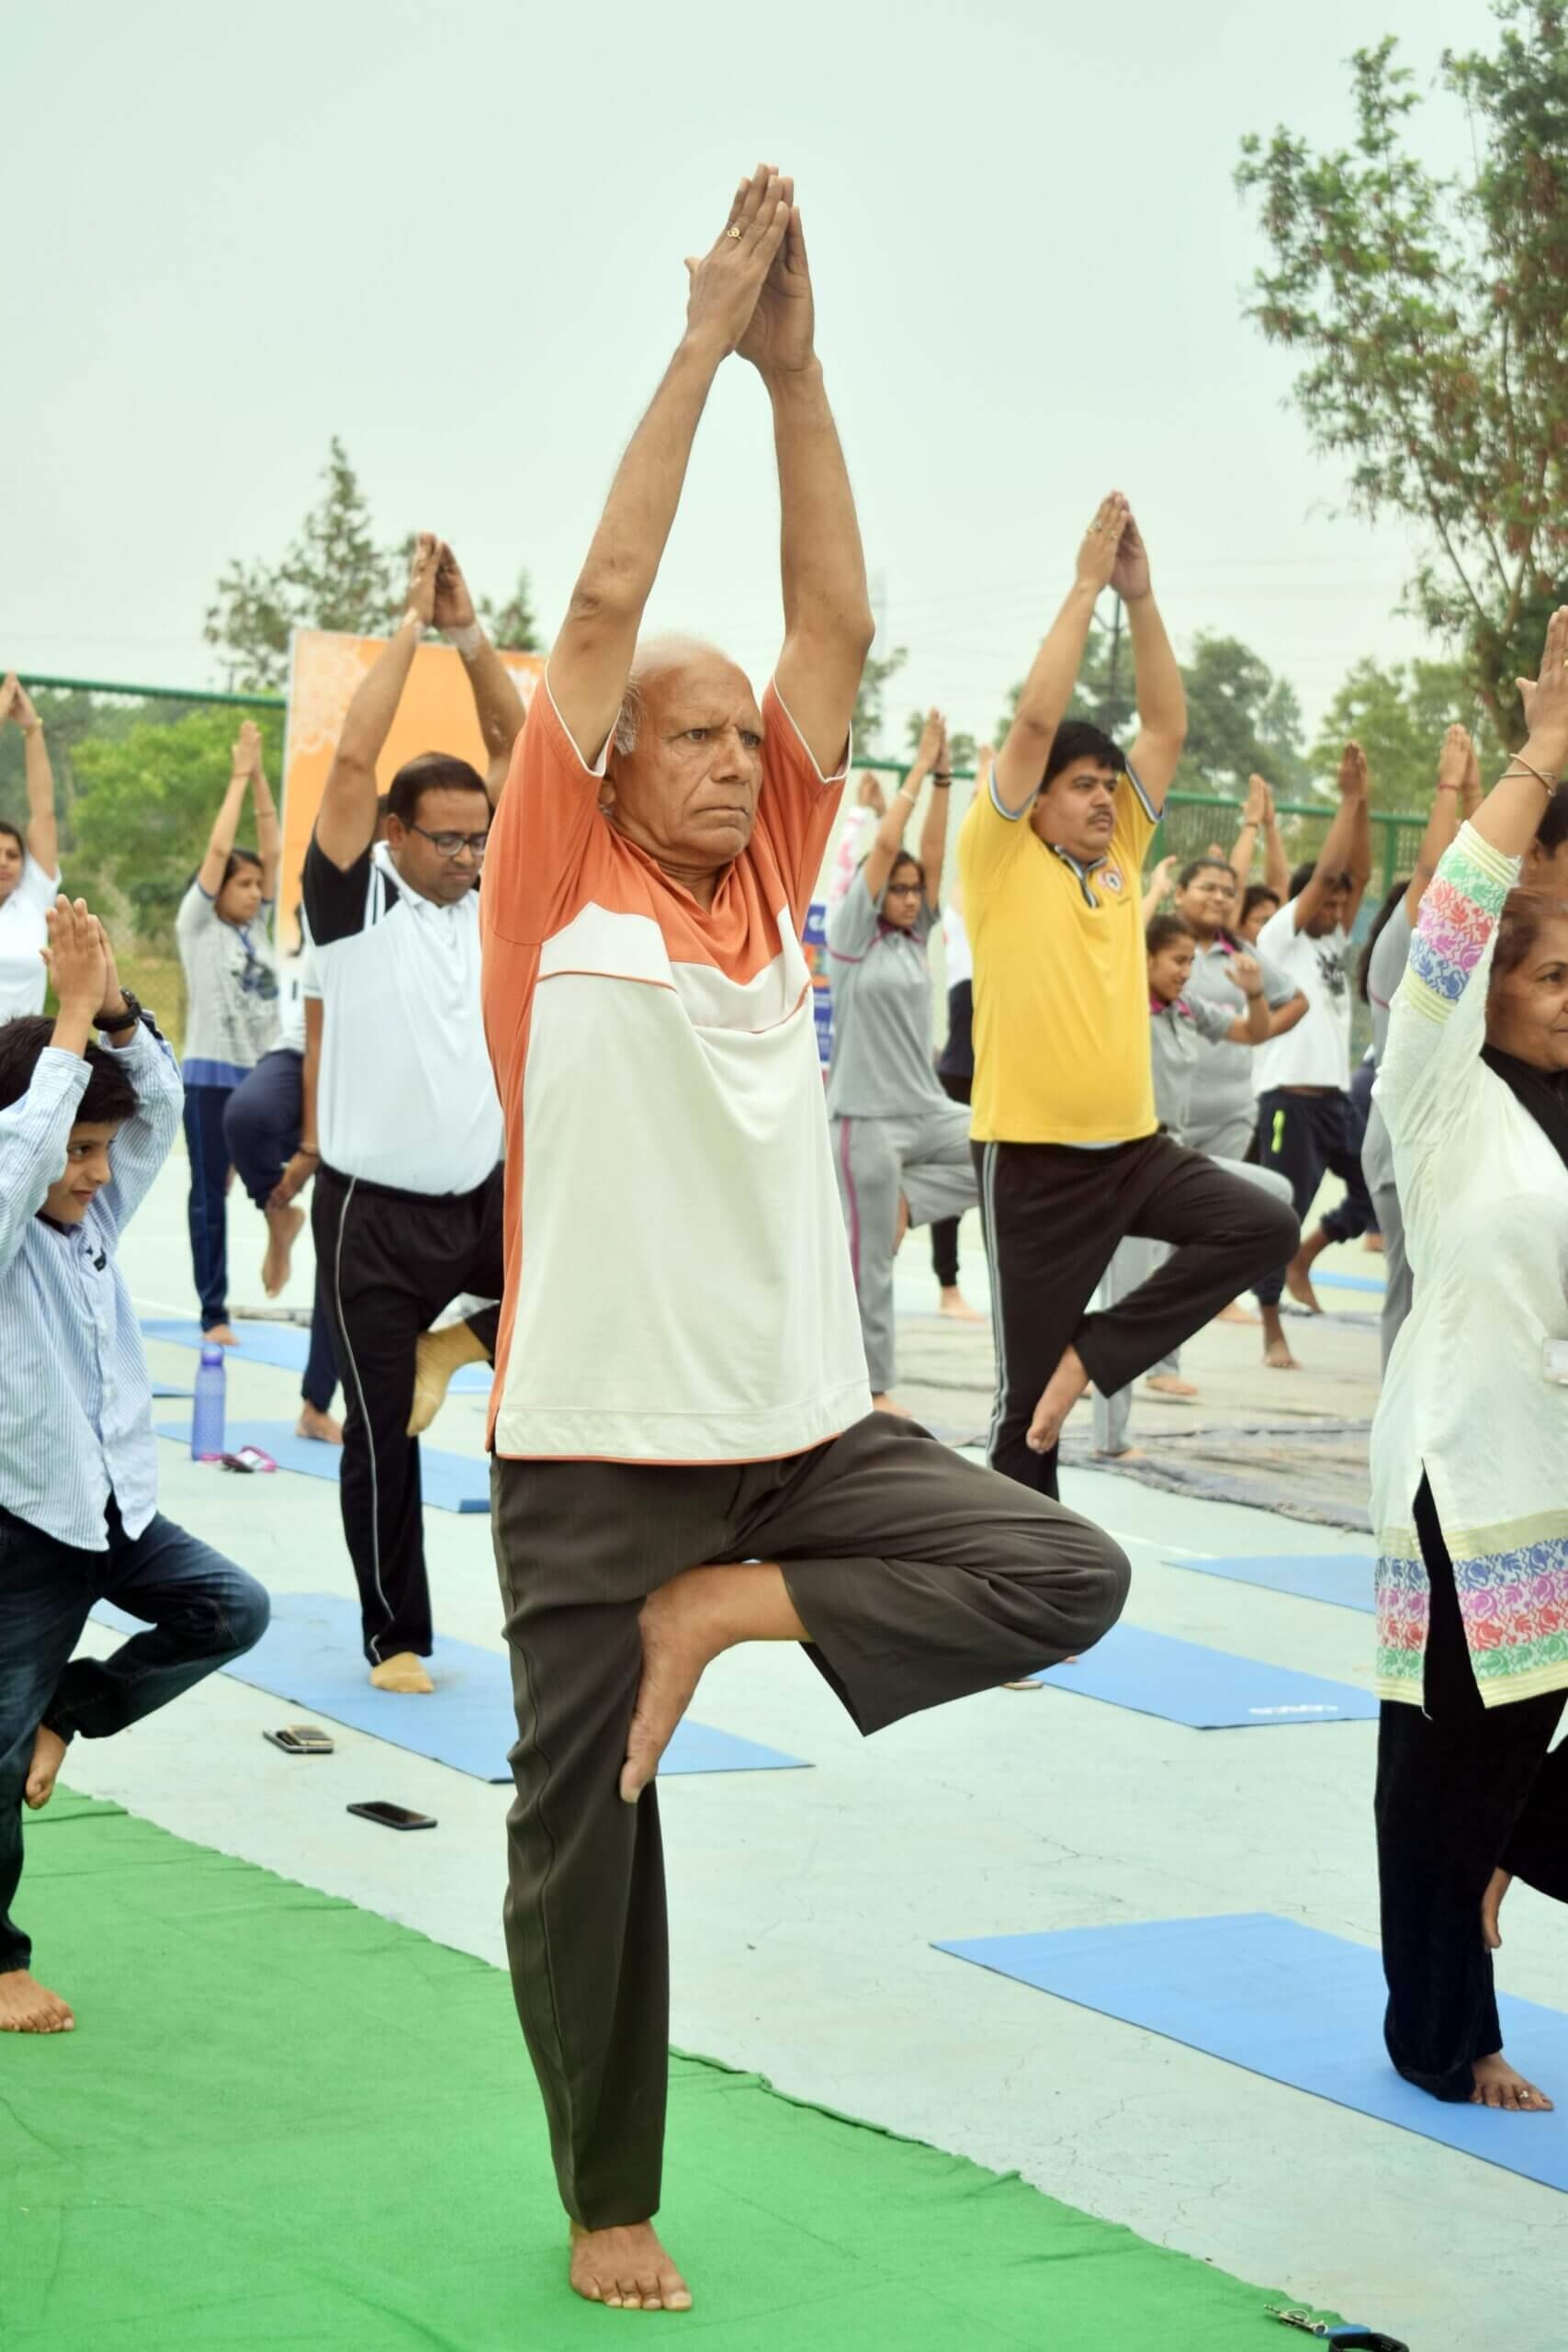 Inter-house Yoga Competition Results with International Yoga Day Celebrations